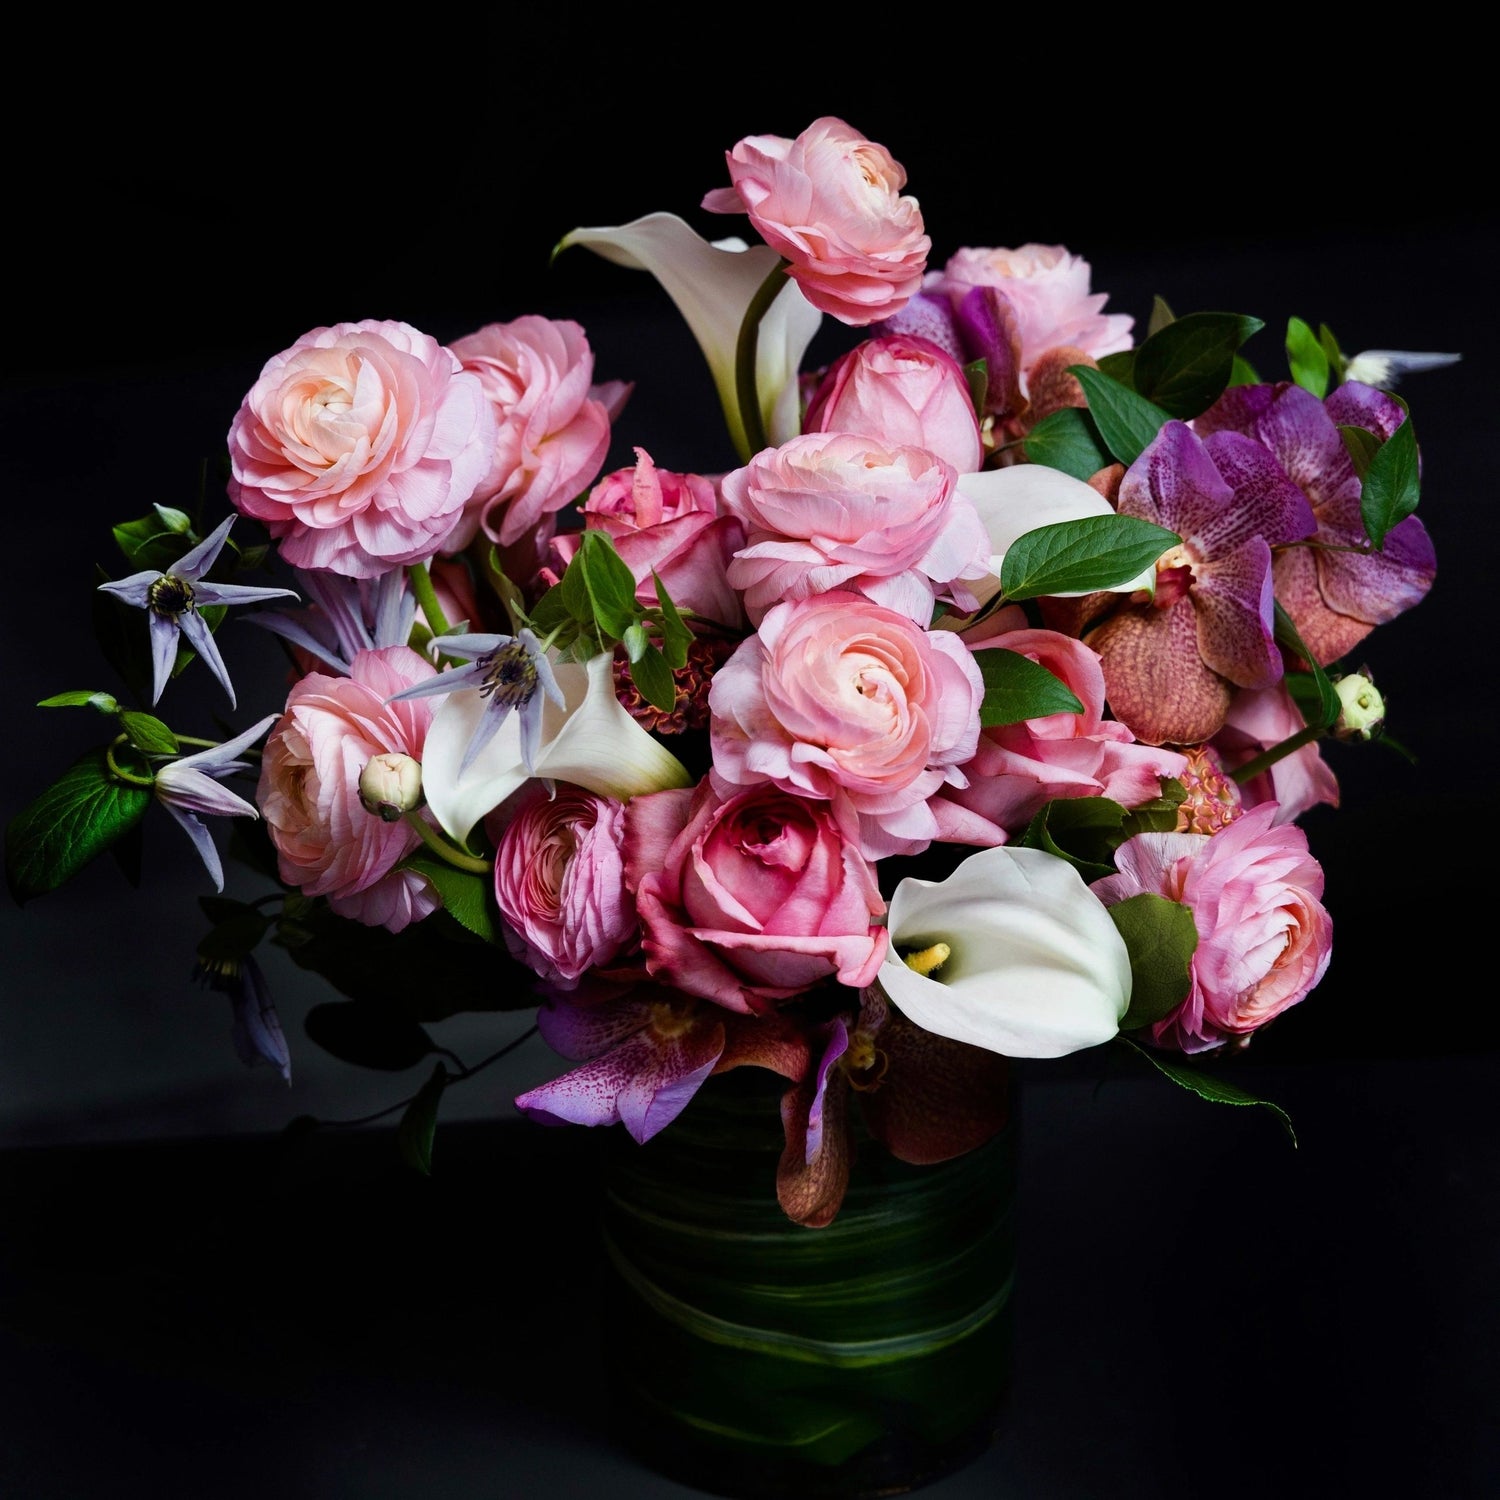 ranunculus and calla lilies are agglomerated waves that evoke an immense pink dream